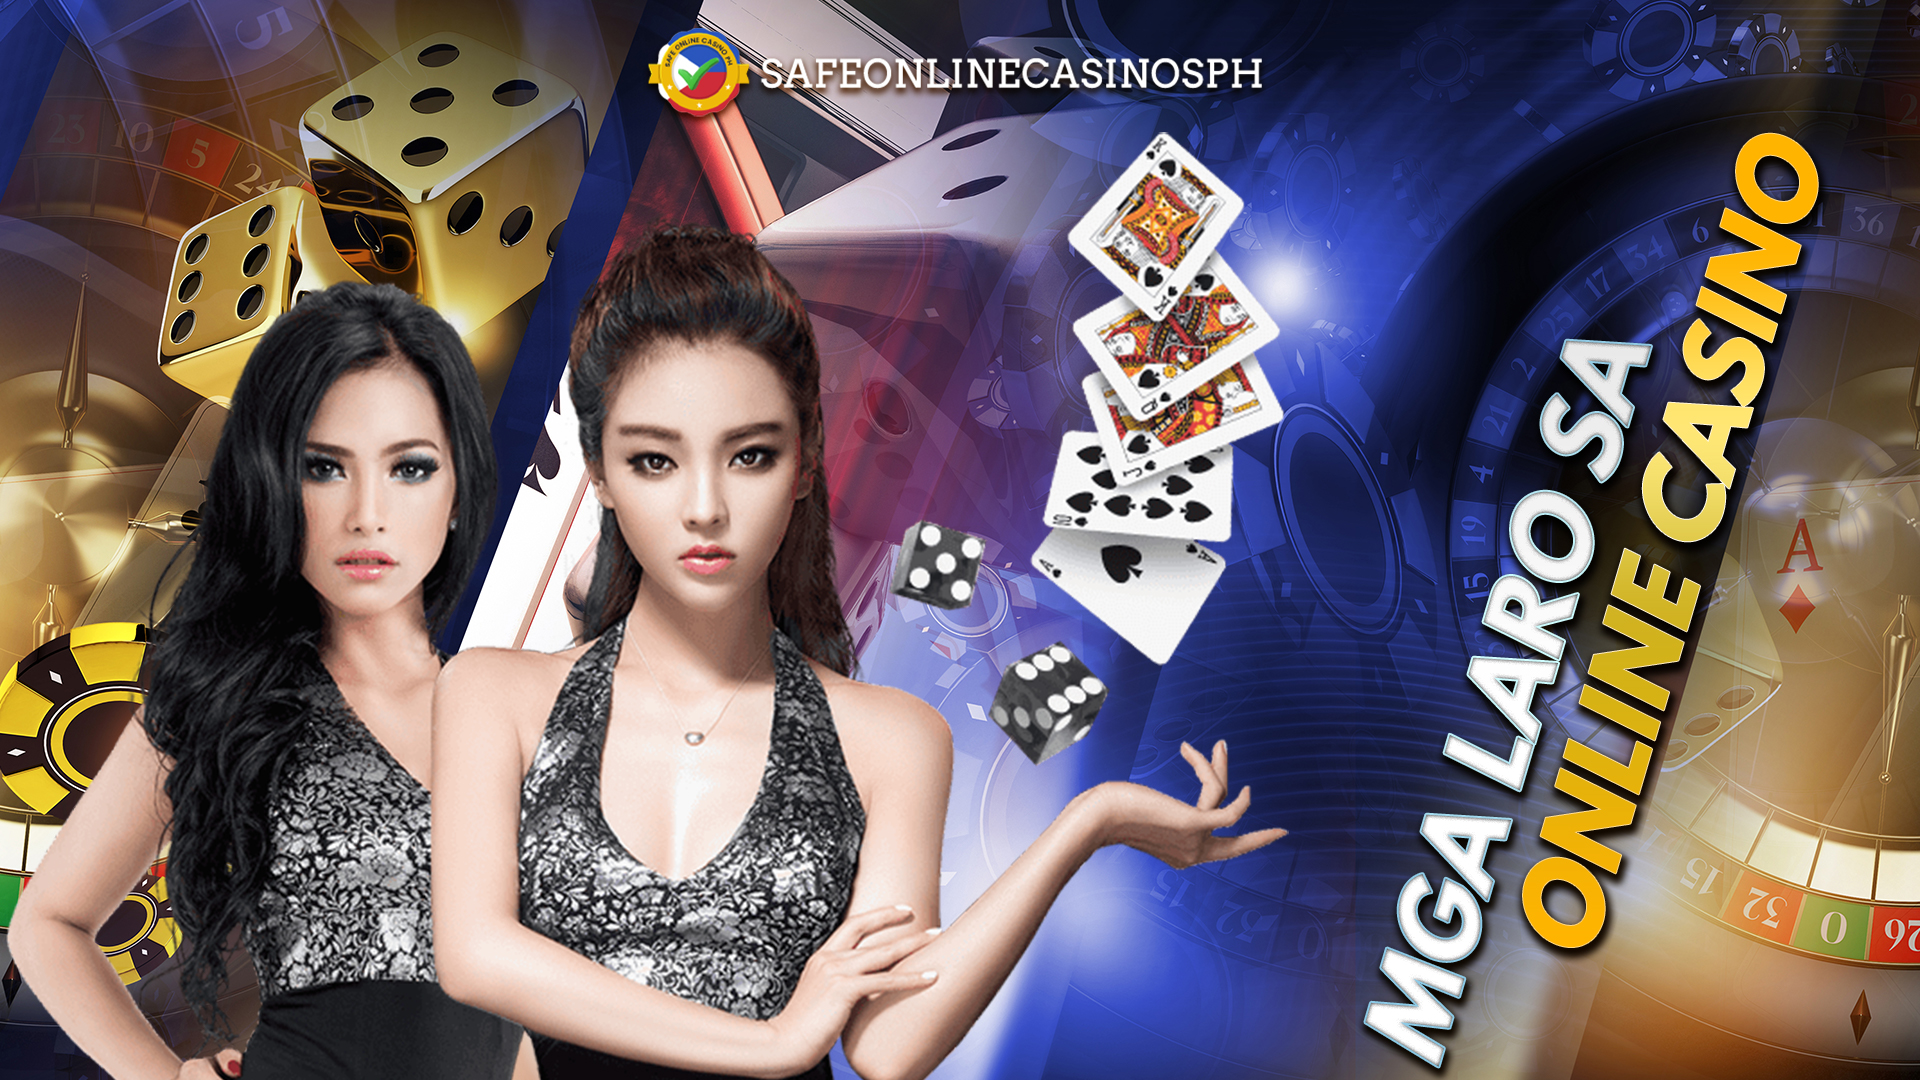 The Best Online Casino Games at SafeOnlineCasinosPH